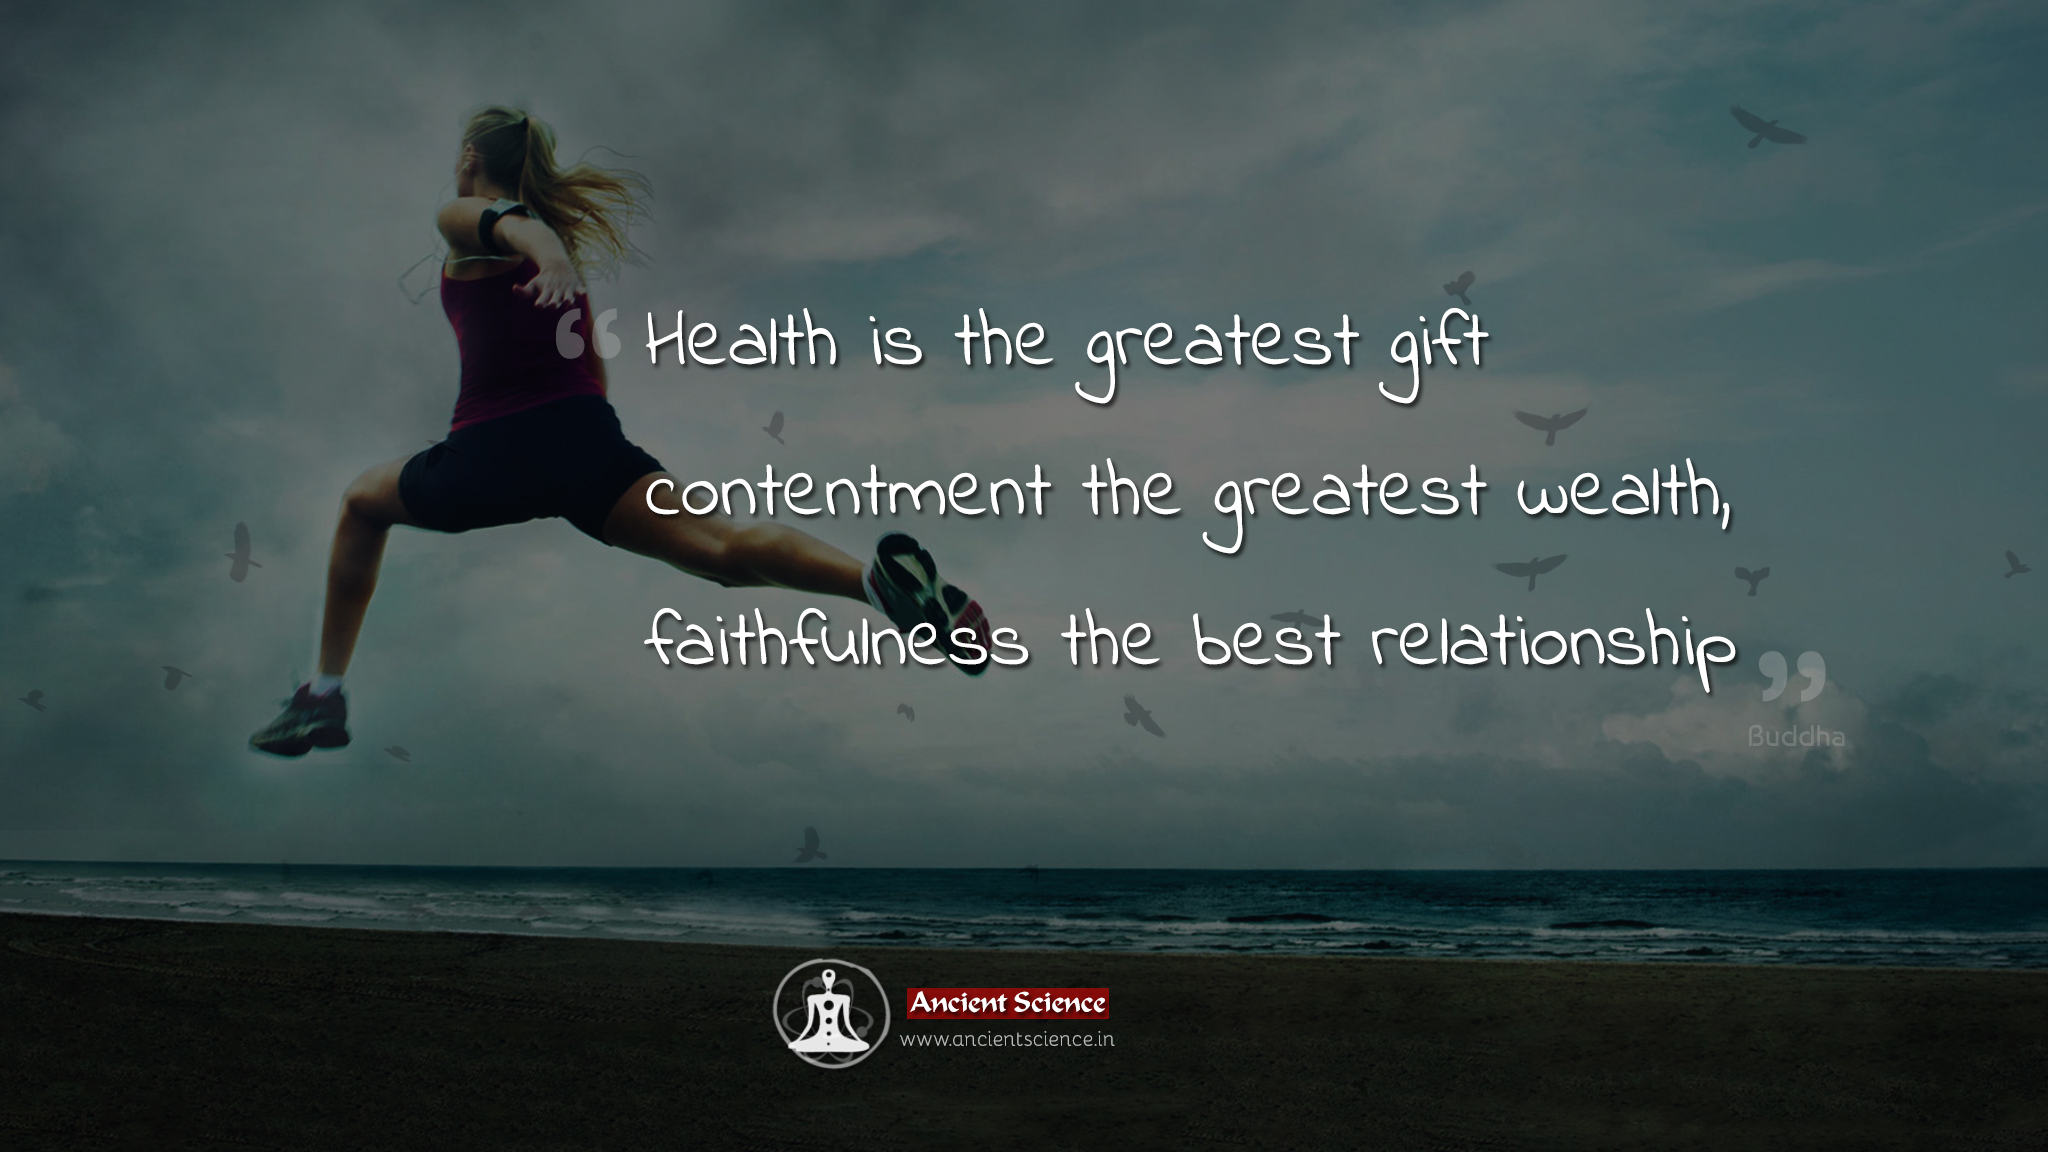 Health is the greatest gift, contentment the greatest wealth, faithfulness the best relationship